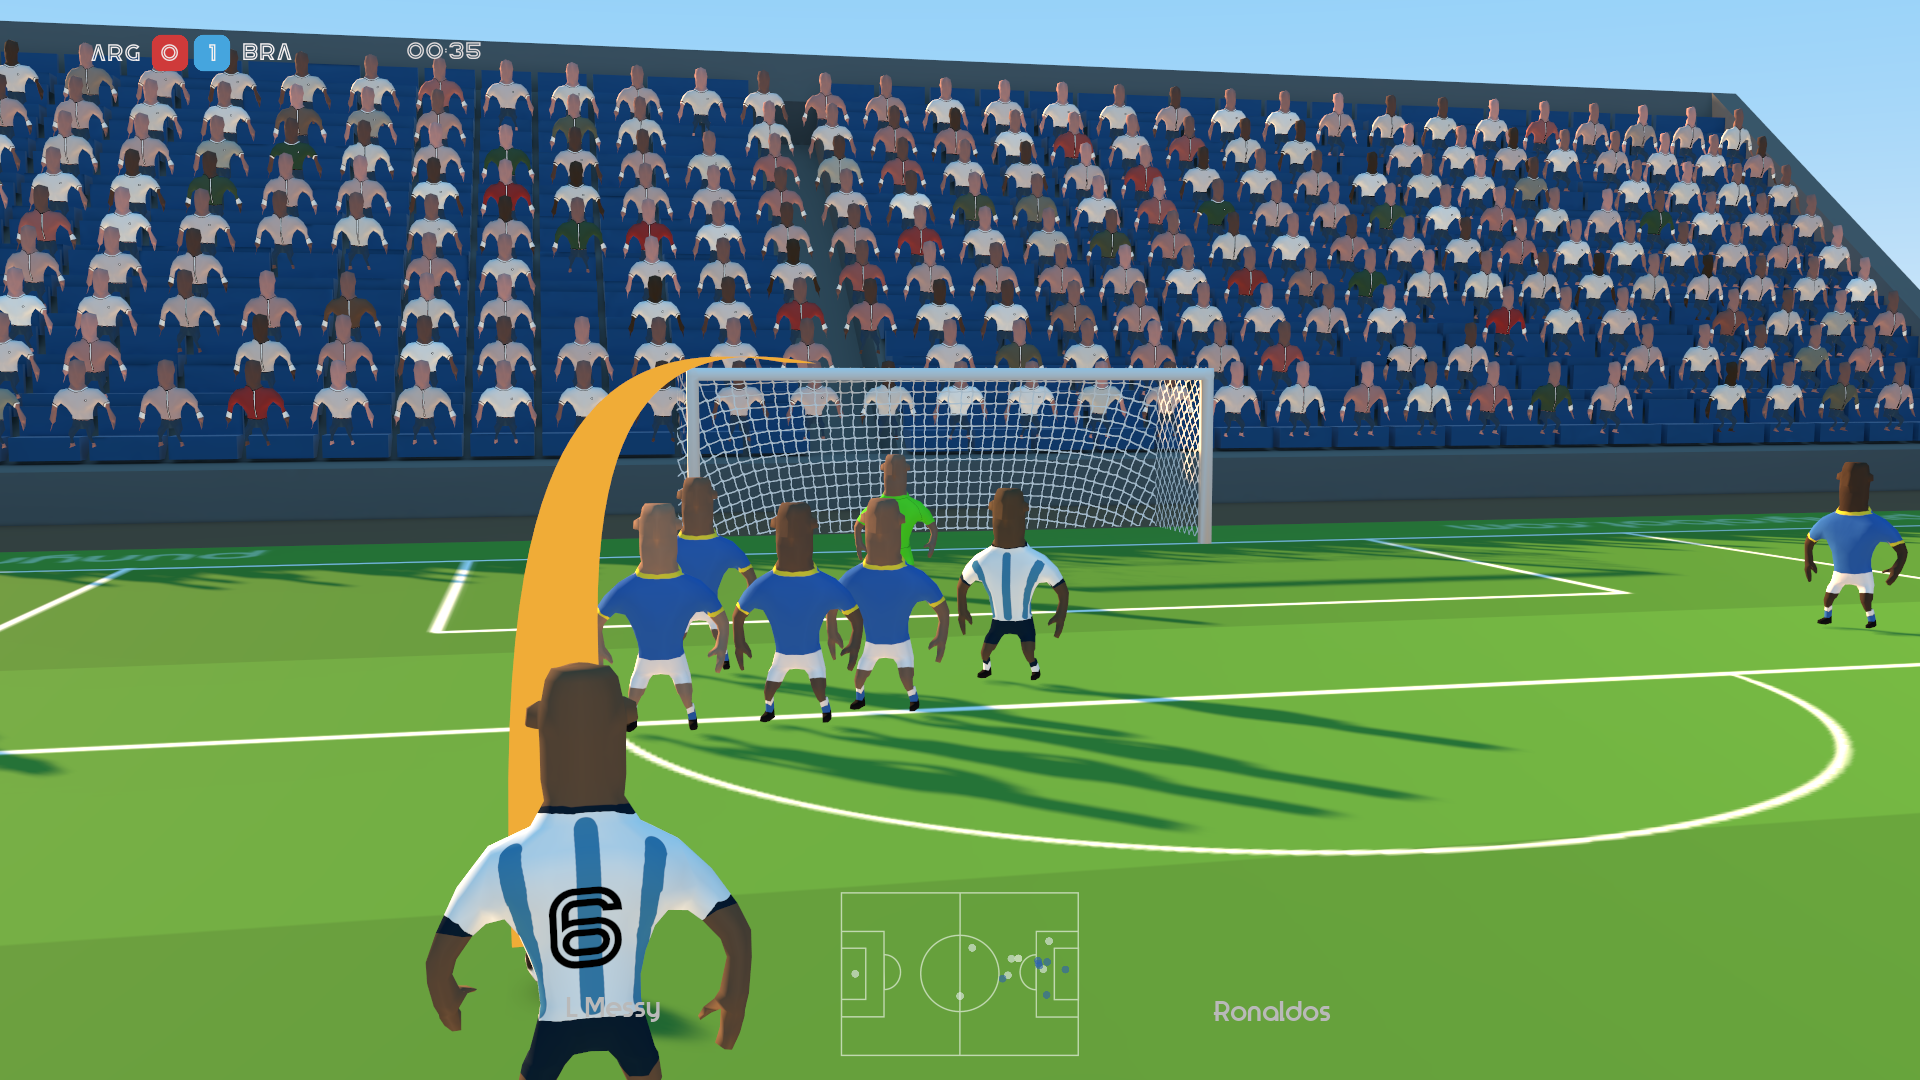 SUPER LIQUID SOCCER - Play Online for Free!